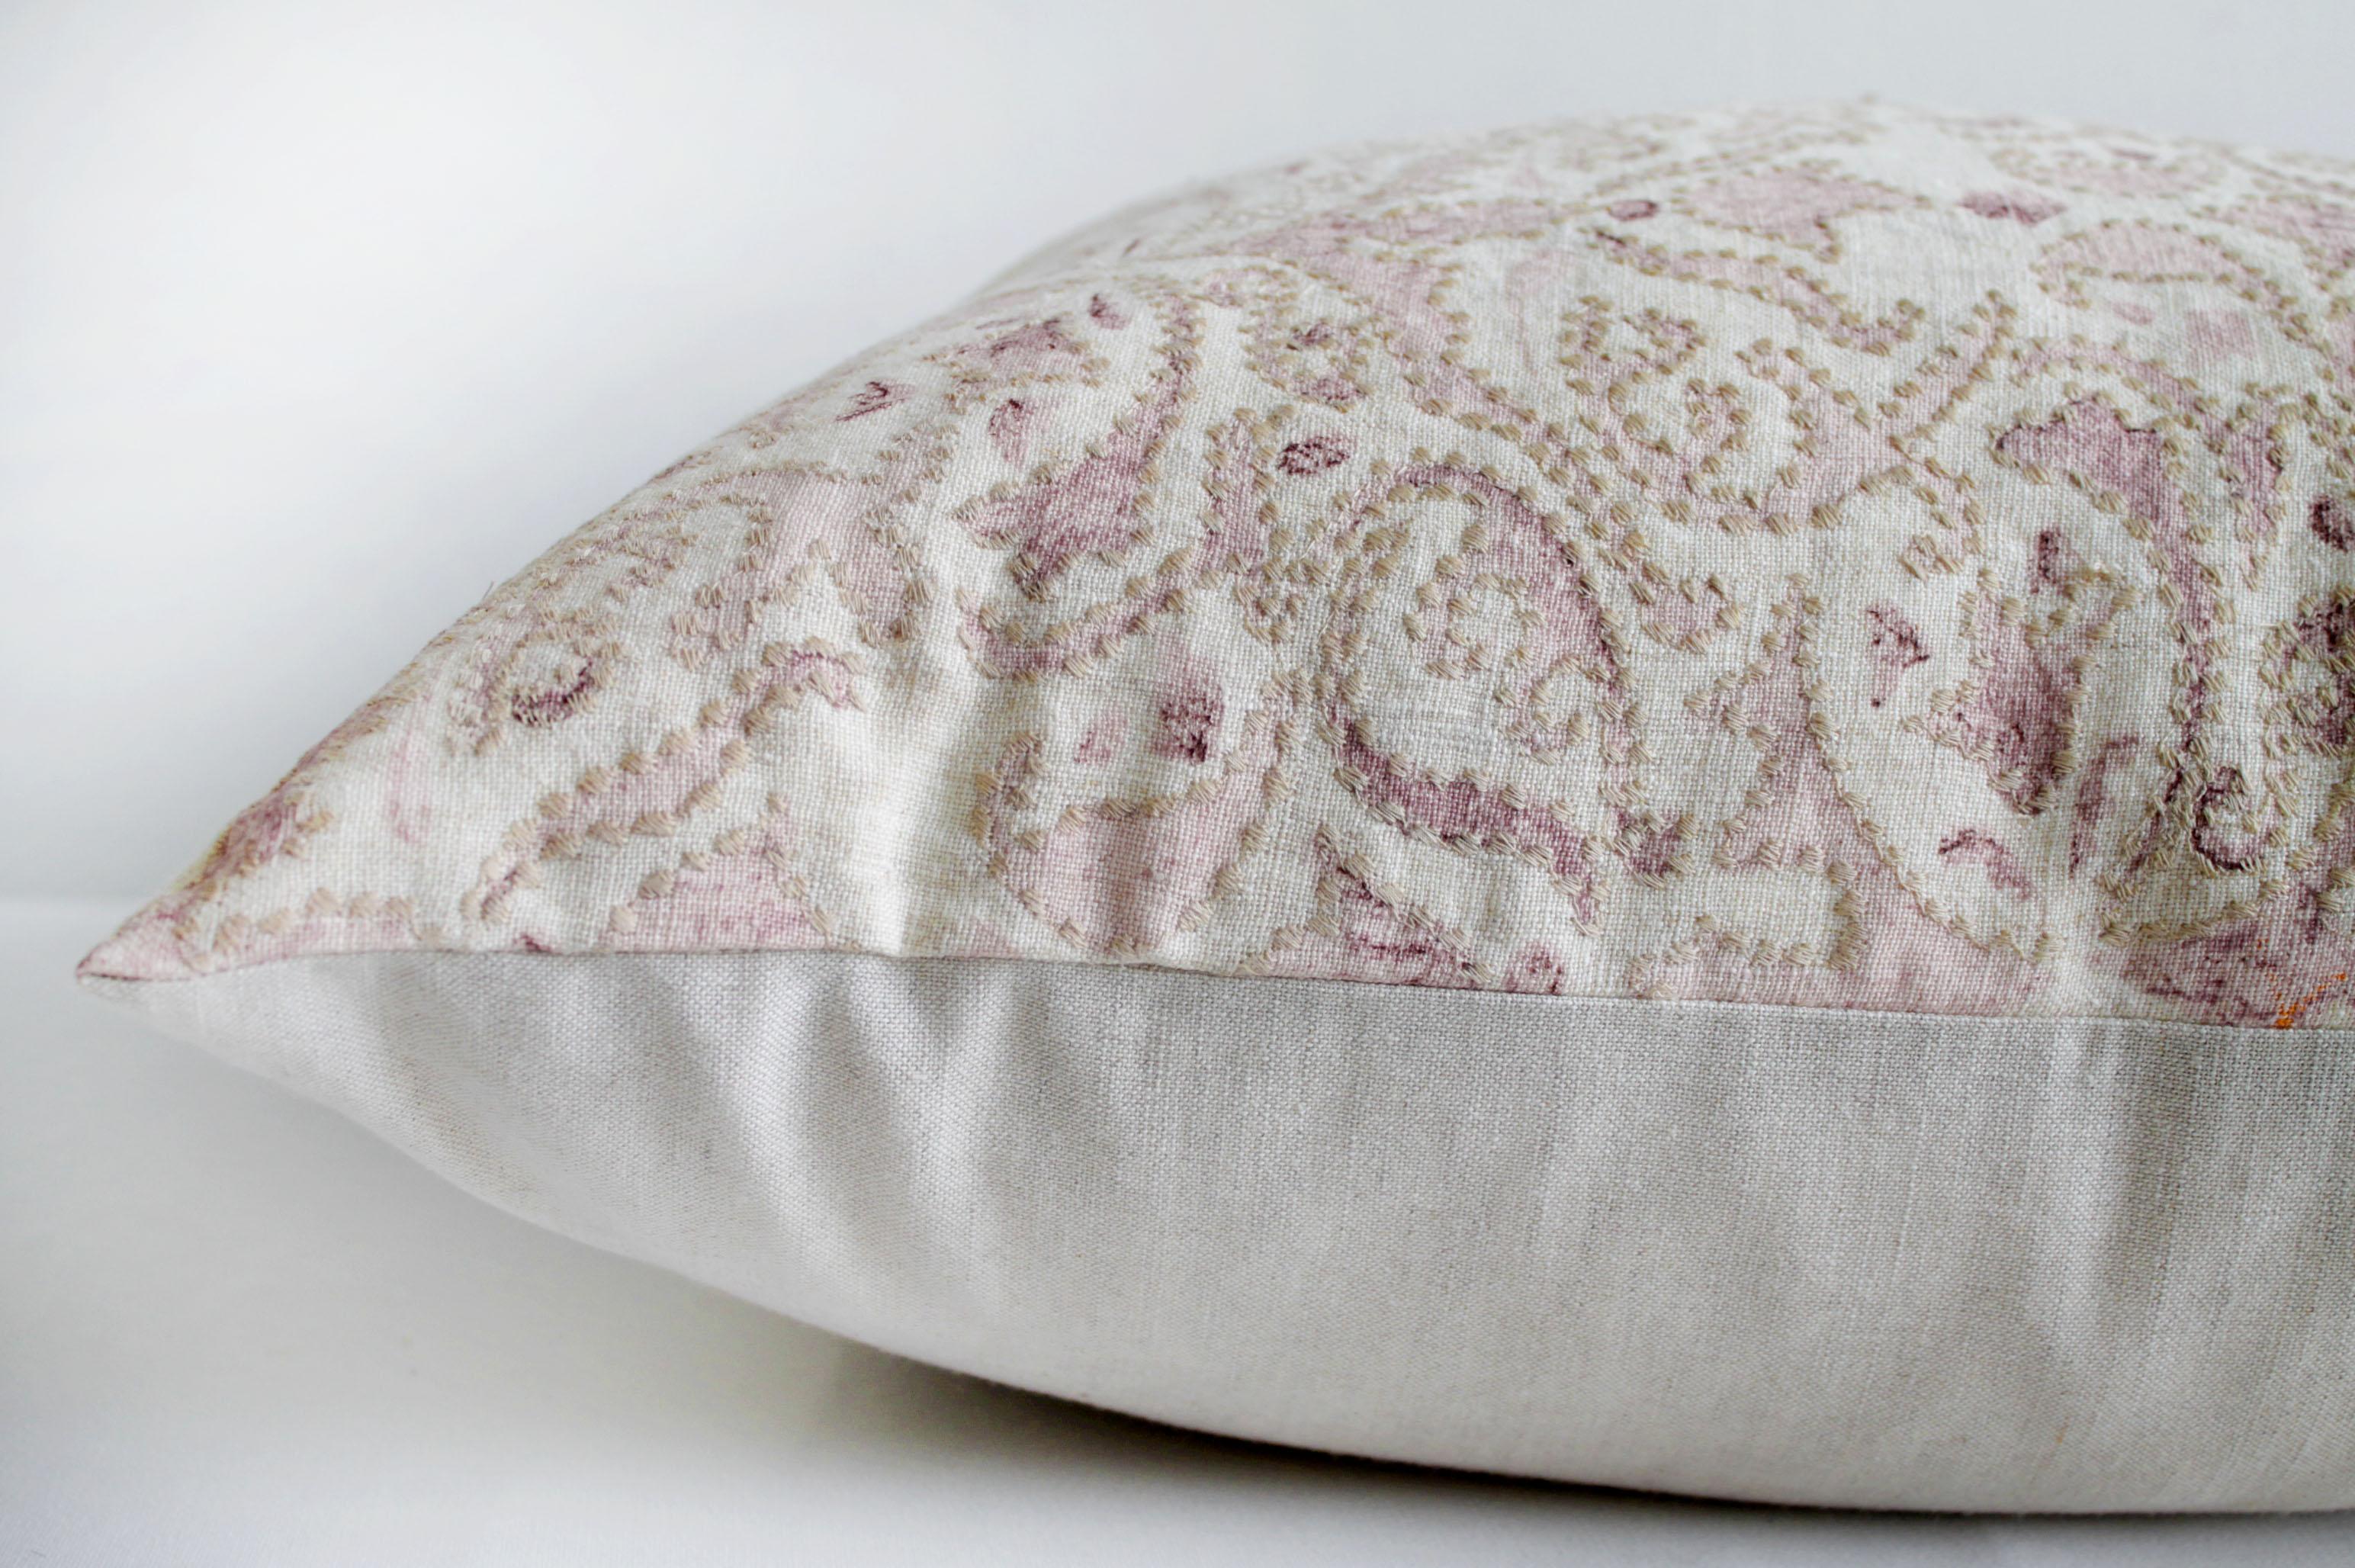 Embroidered Linen Pillow Cover in Blush Pinks and Natural Linen 2